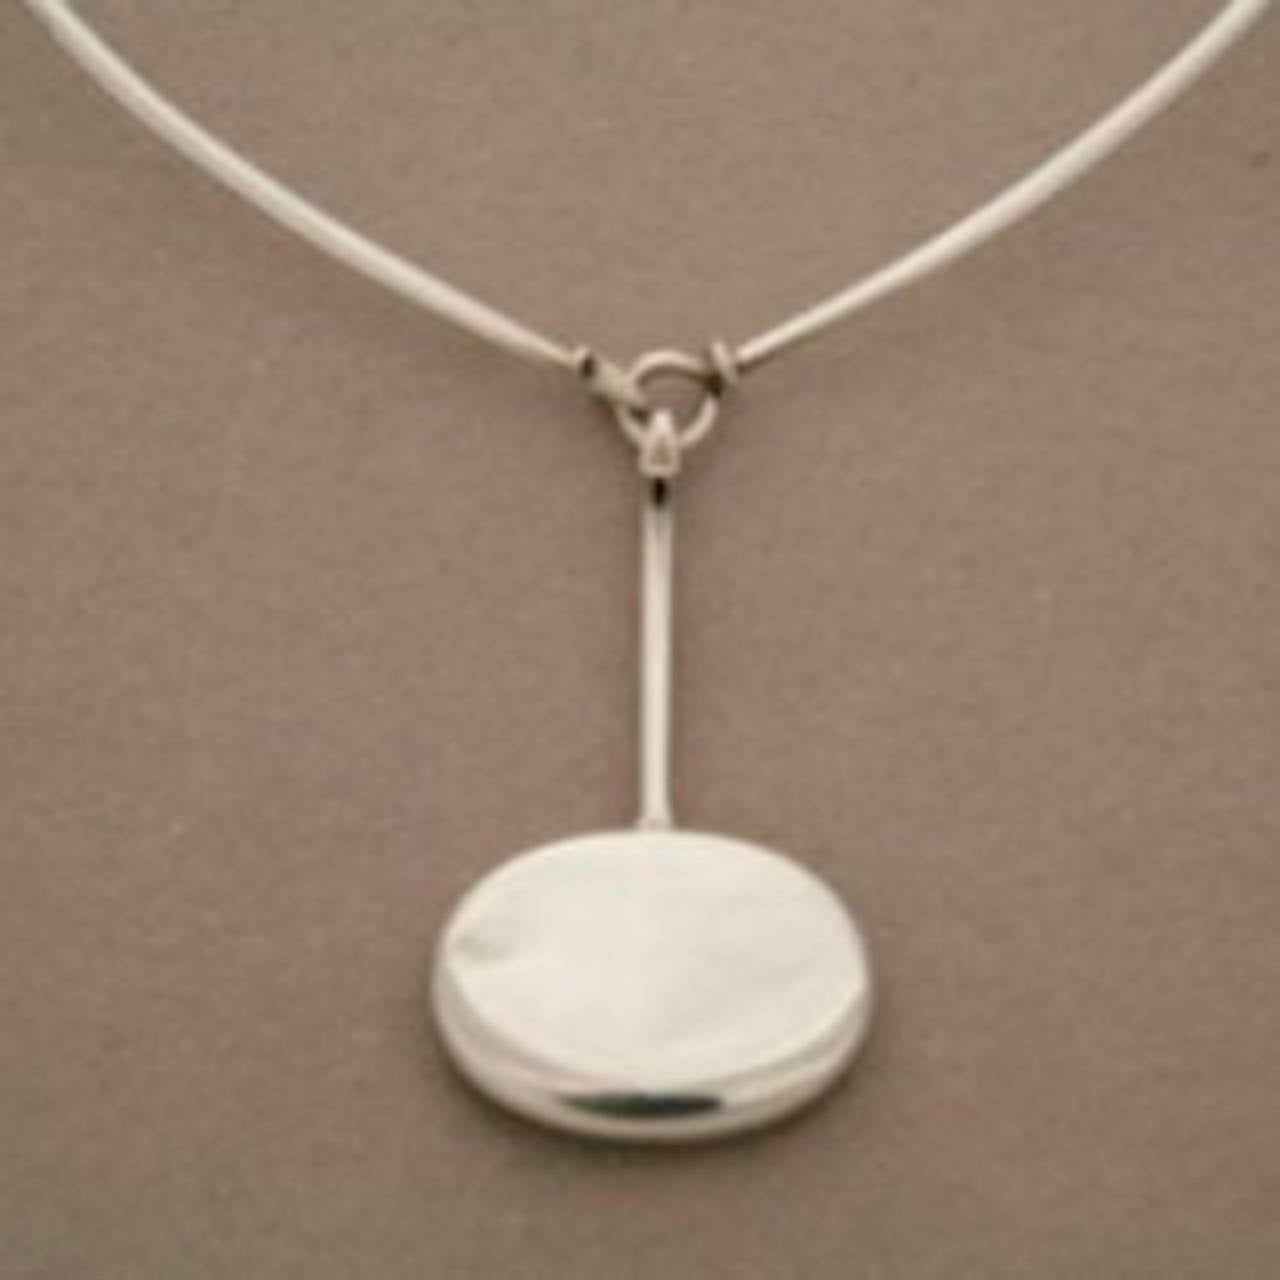 Georg Jensen Sterling Silver Pendant No. 304 by Vivianna Torun with No. 174 Sterling Silver Neck Ring. 

Circa 1970s and from original production.

Excellent vintage condition. Neck ring included in price. Can be interchanged with neck ring No.